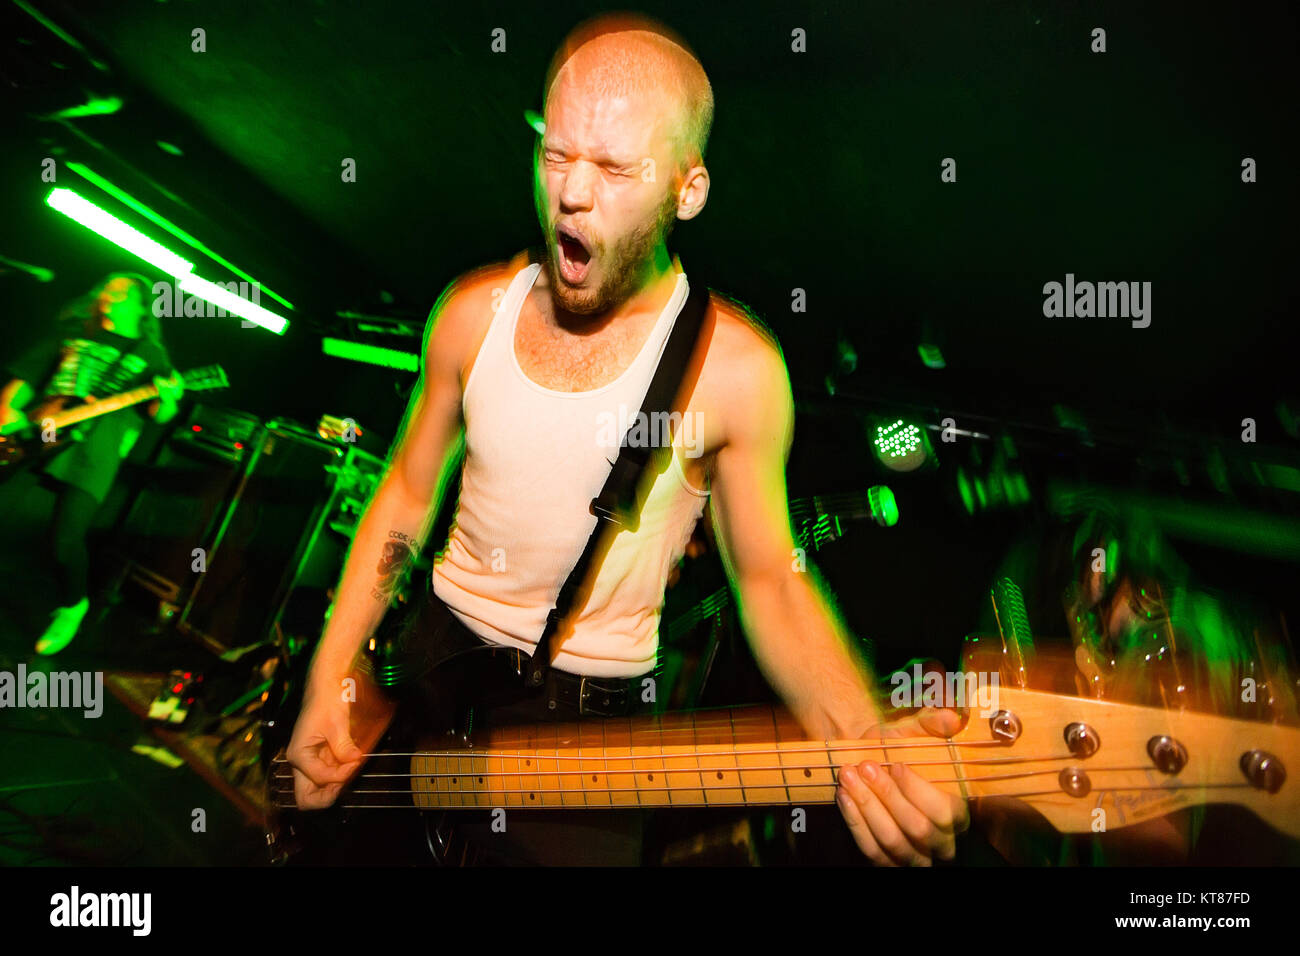 The American Metalcore Band Code Orange Performs A Live Concert At